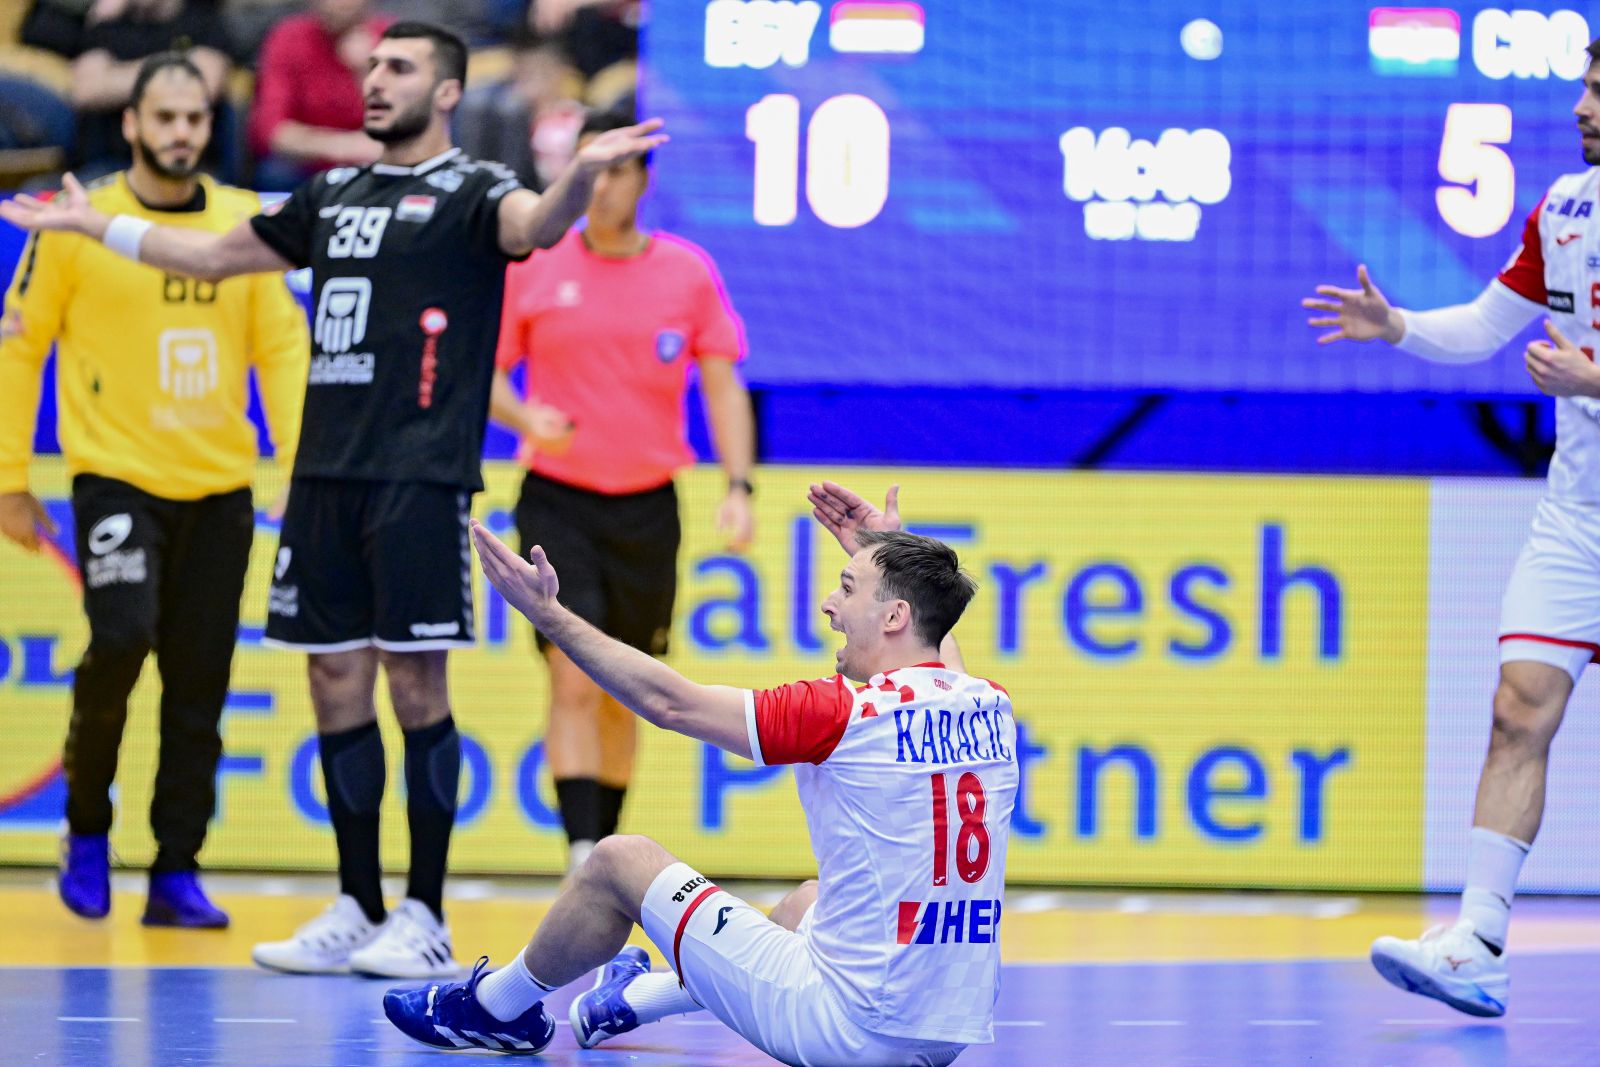 epa10403693 Croatia's Igor Karacic (down) and Egypt's Yehia Elderaa (L) argue with the referee during the IHF Men's World Championship group G handball match between Egypt and Croatia, at Husqvarna Garden in Jonkoping, Sweden, 13 January 2023.  EPA/Mikael Fritzon SWEDEN OUT